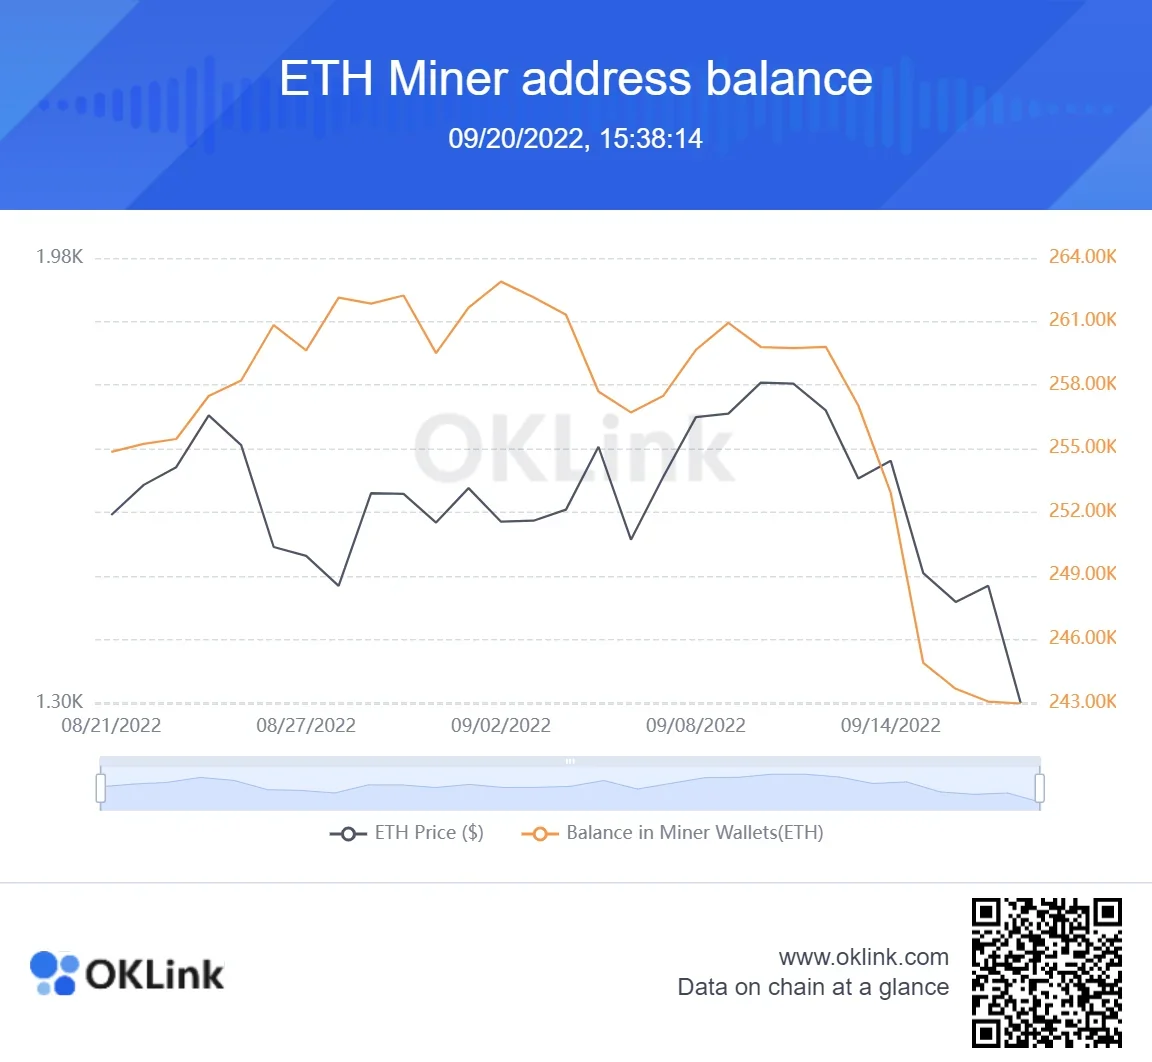 A chart showing miners' ETH holdings alongside the price of ETH.